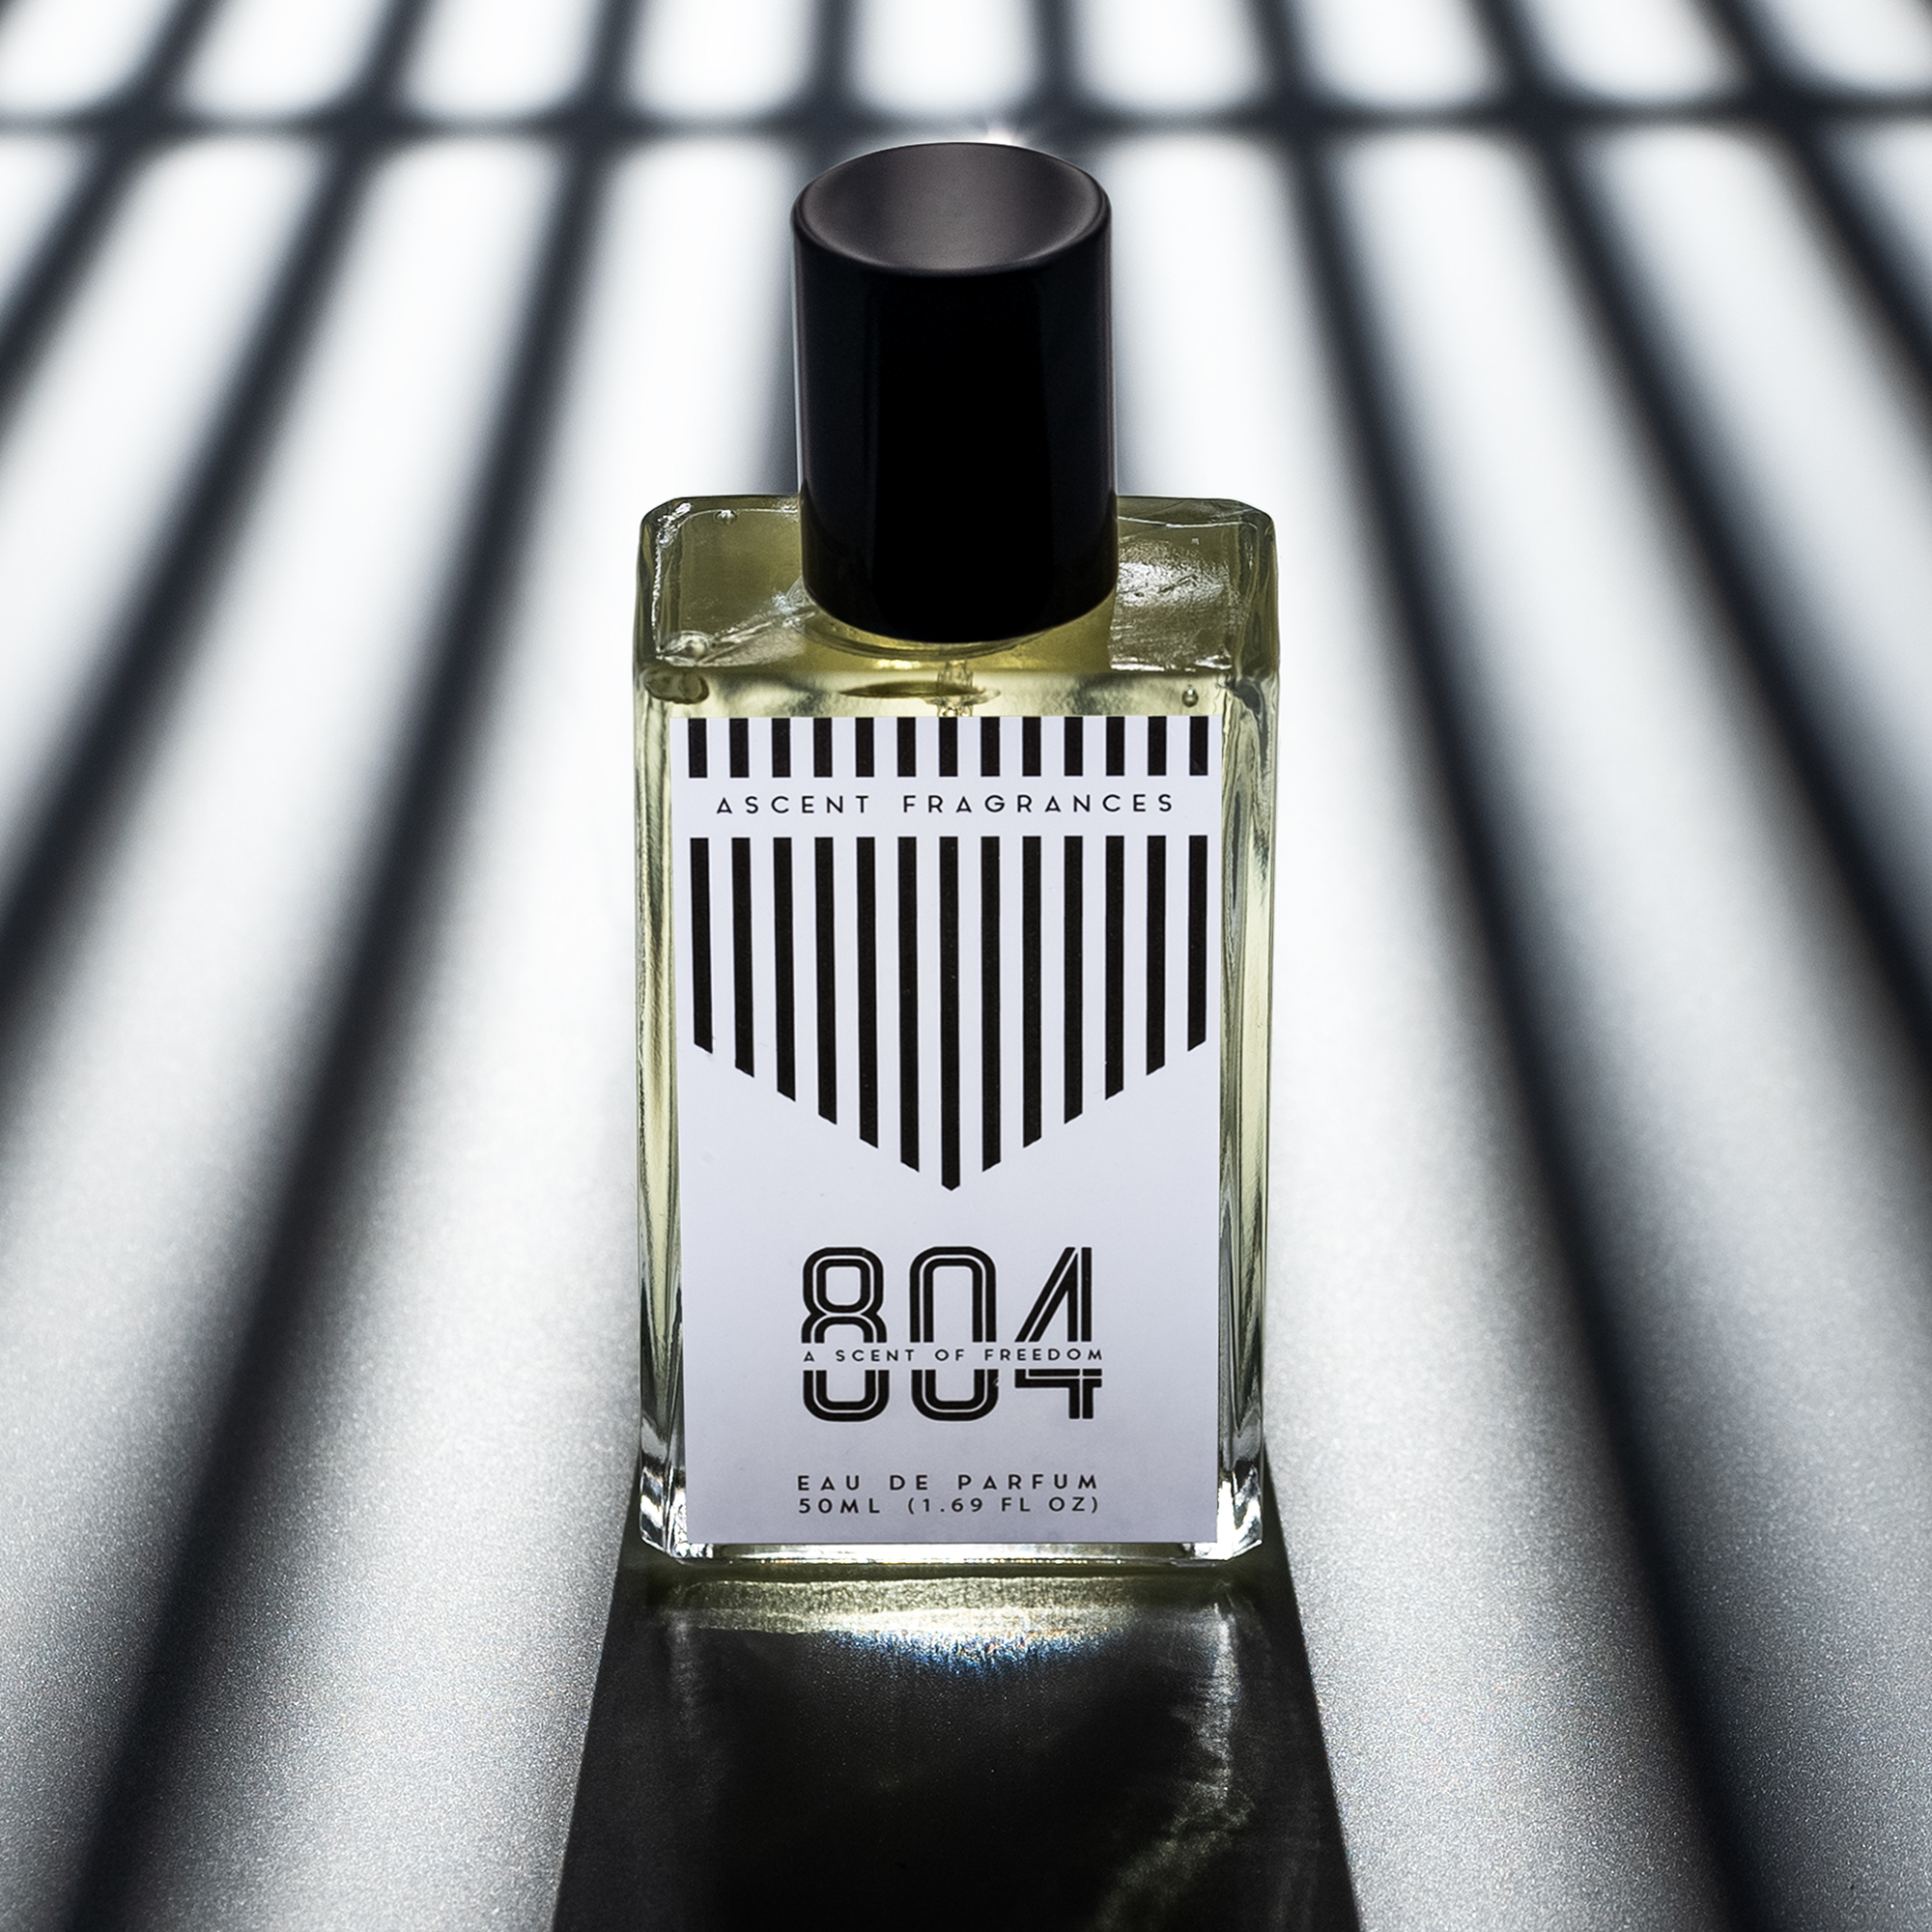 804 - A Scent of Freedom!